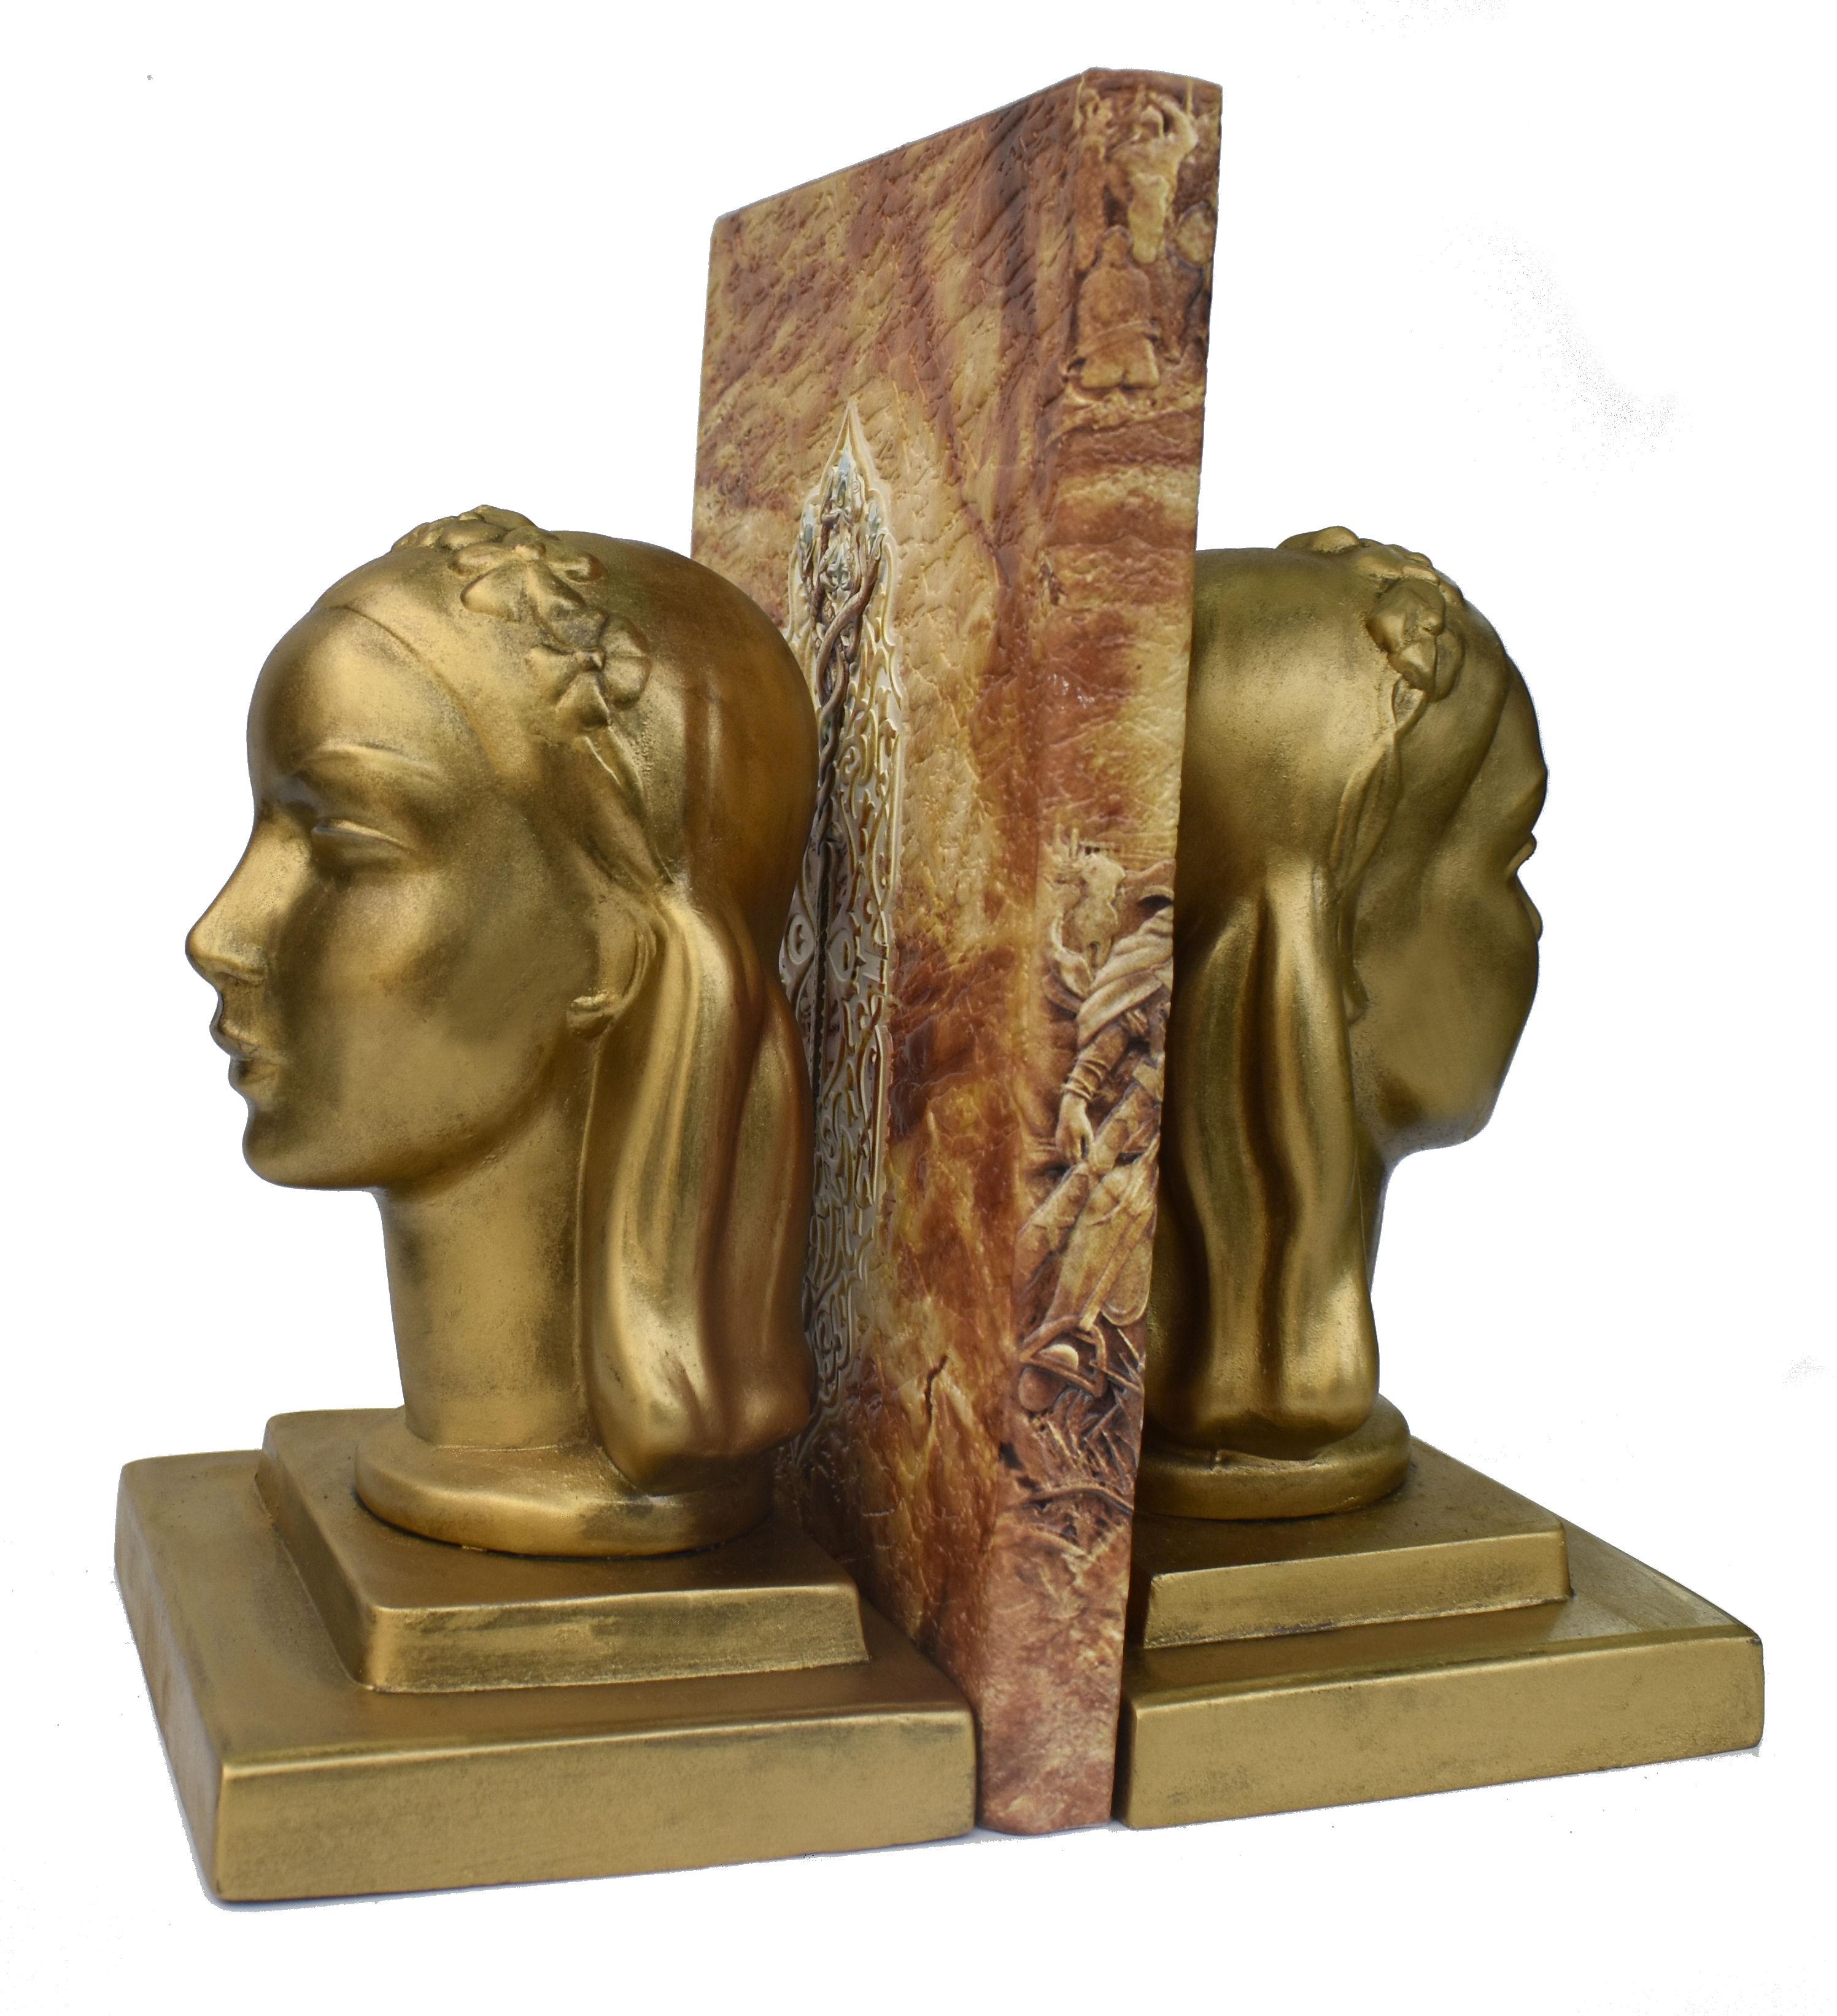 20th Century Art Deco Female Bust Bookends by Frankart Inc, c1930